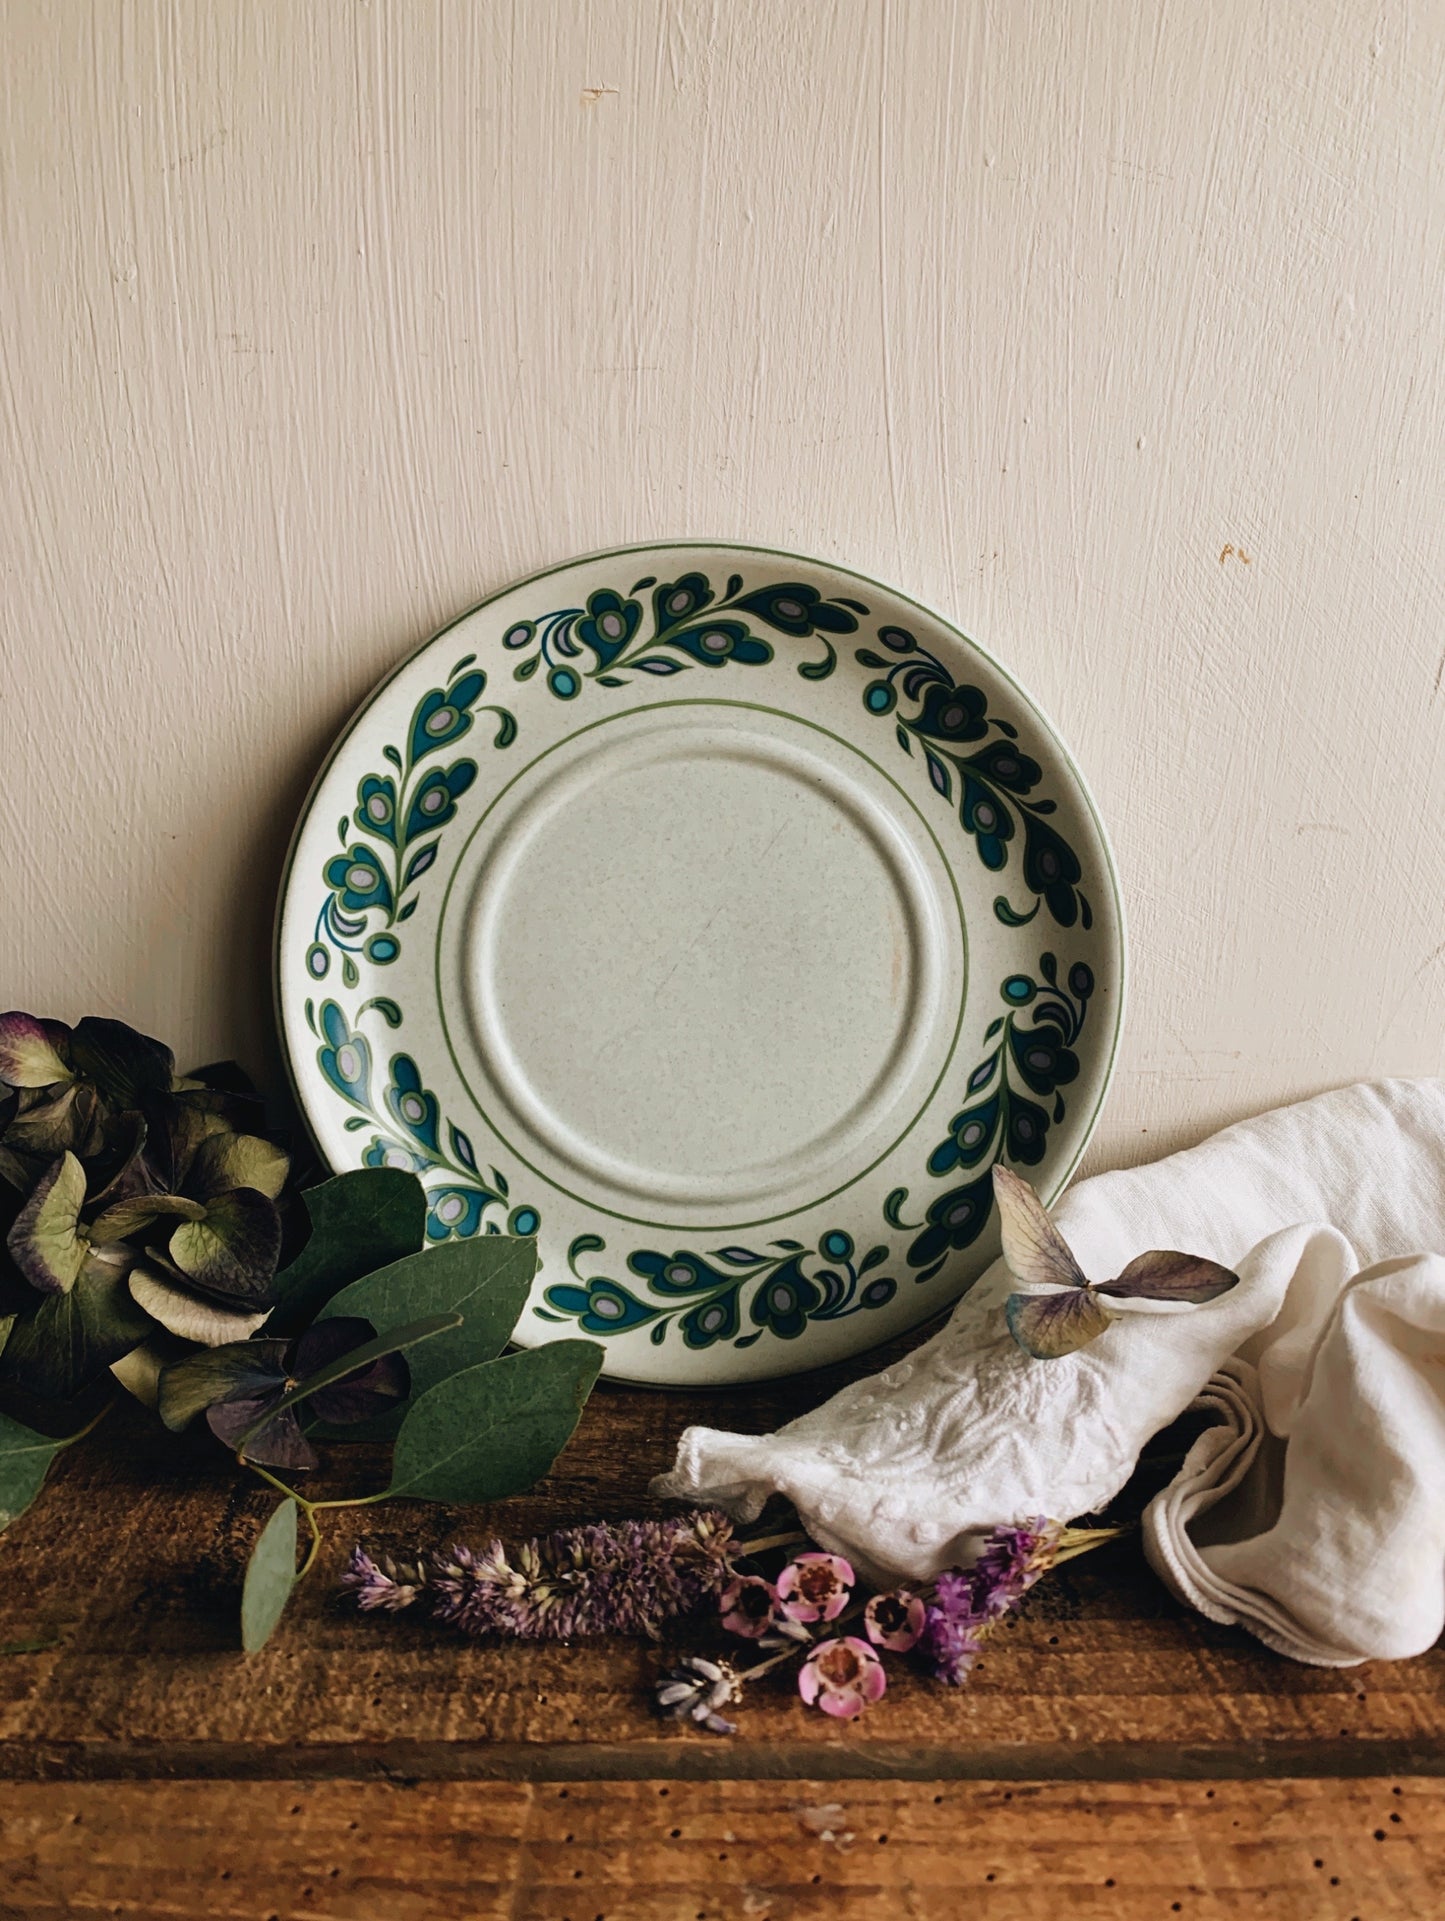 Vintage Midwinter Saucer Plates (four available sold separately)